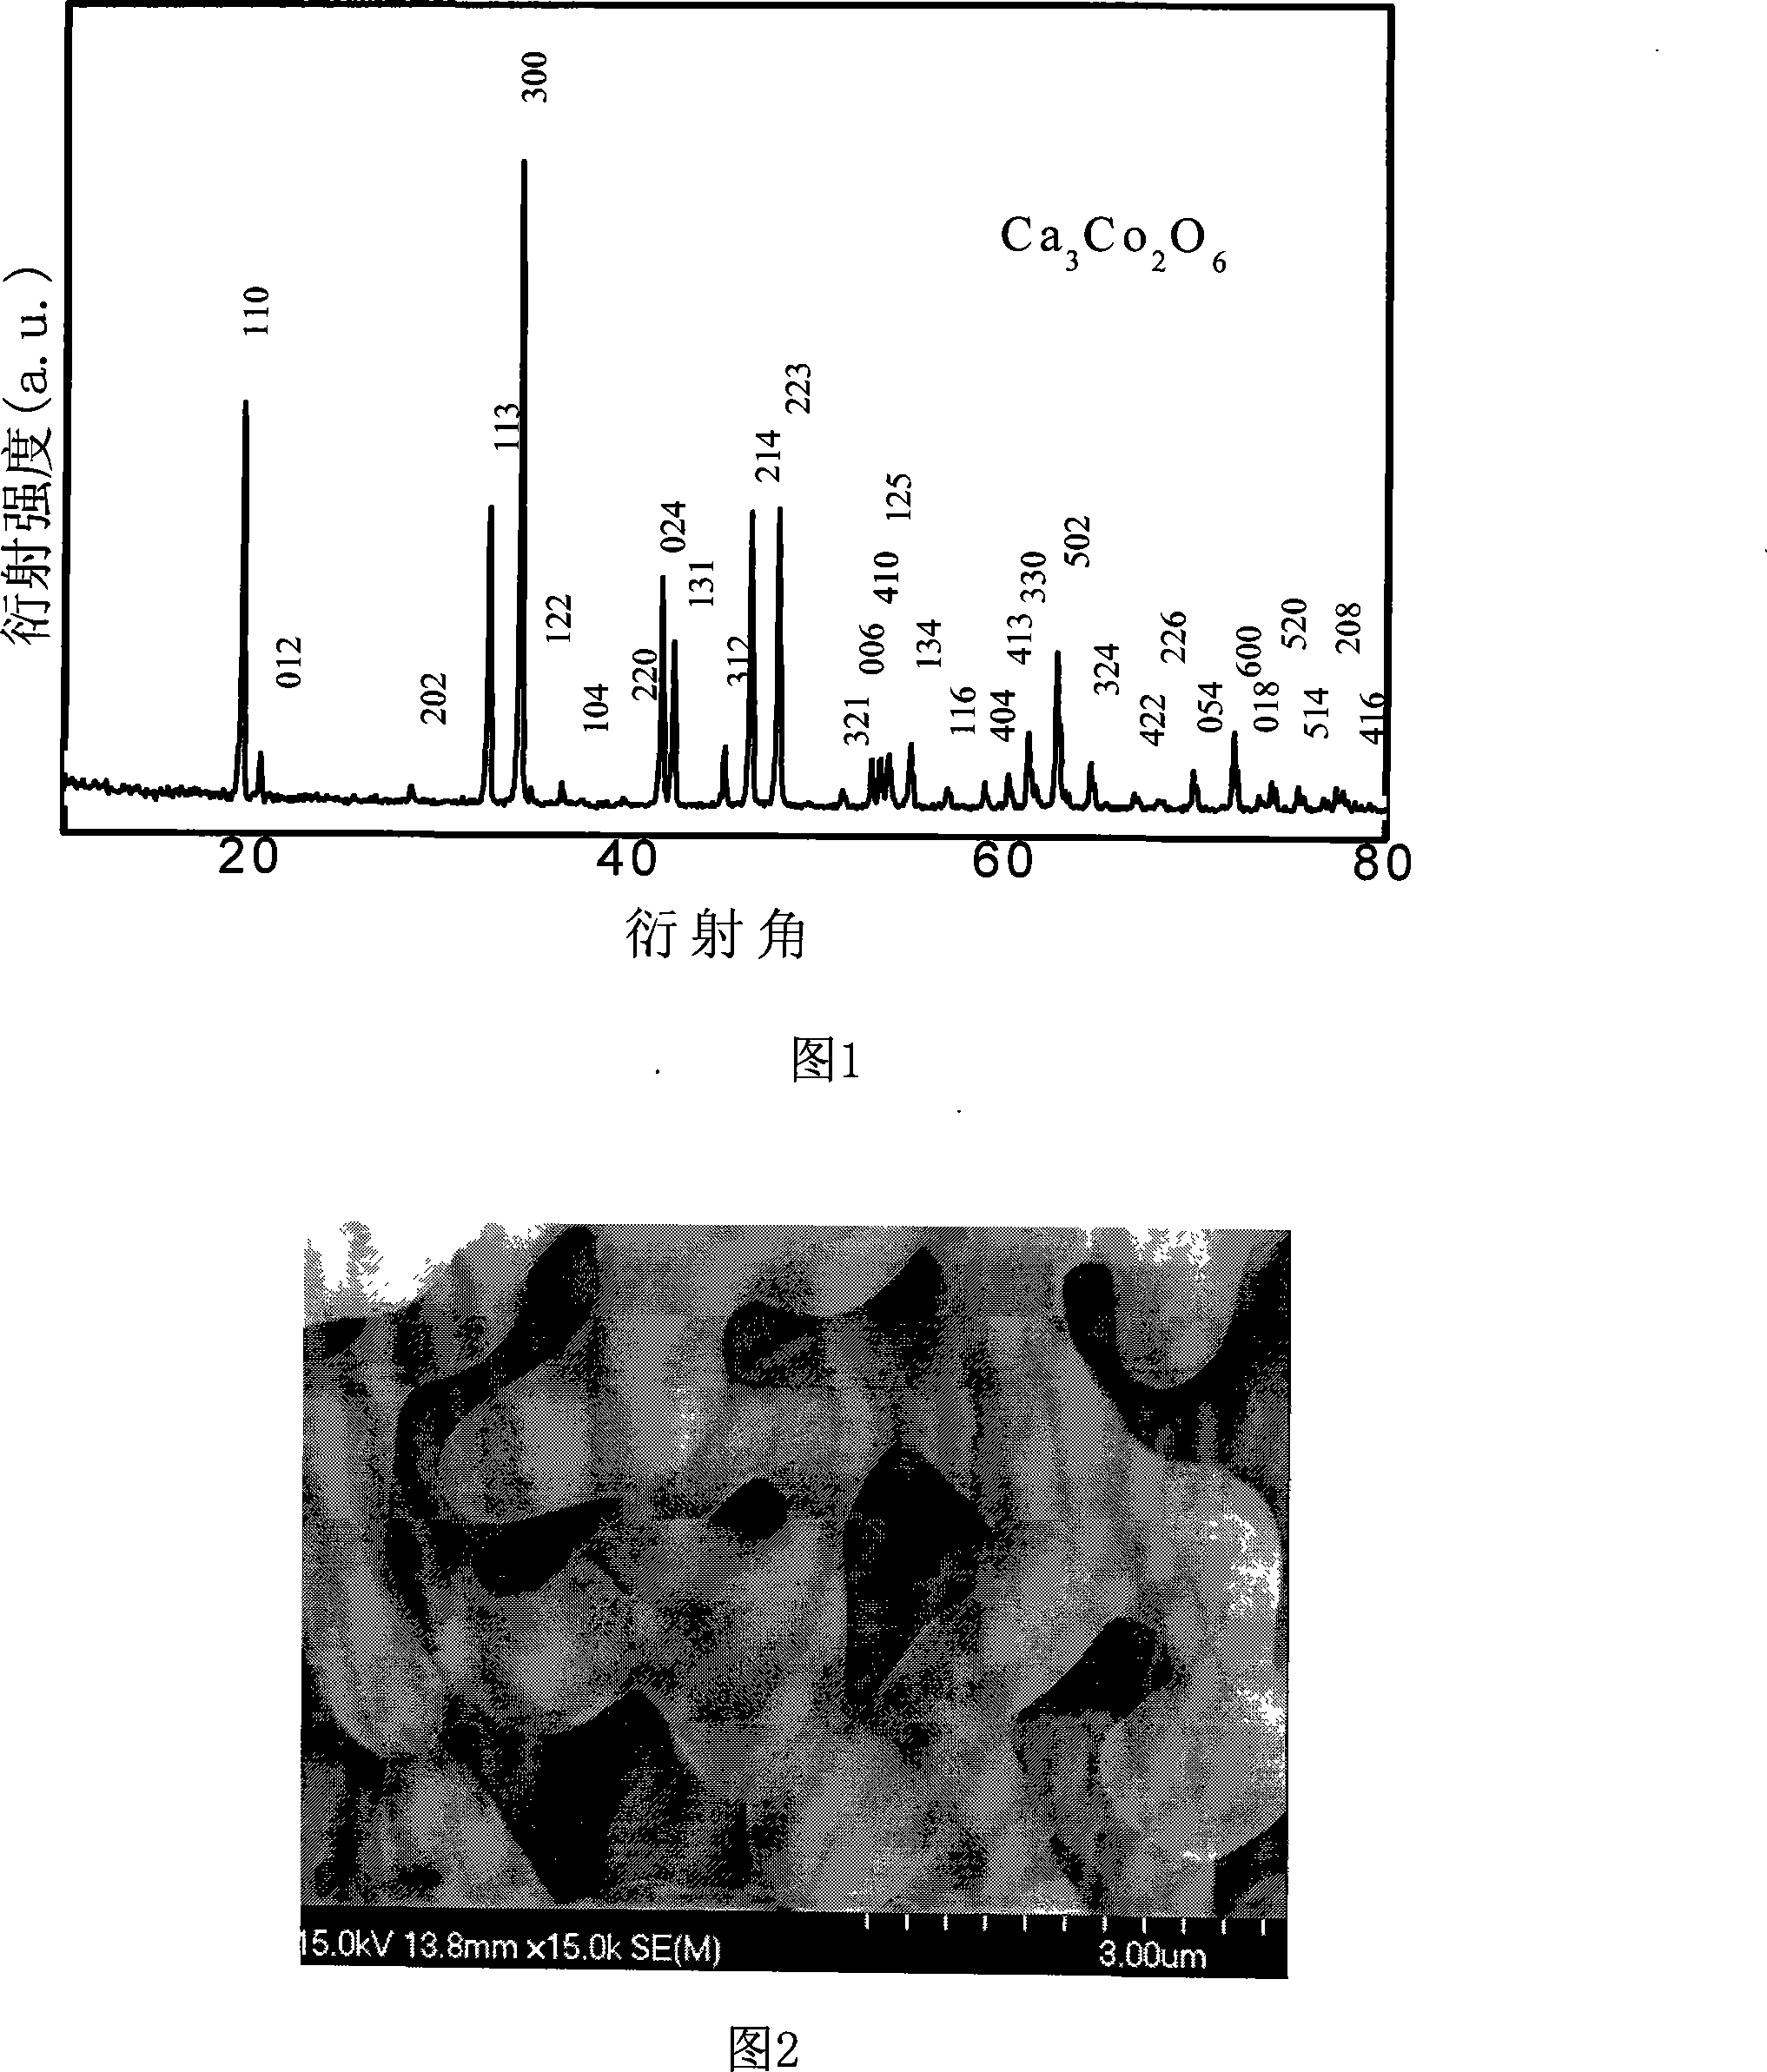 Modified Ca-Co-O system doped transition metal composite oxides and preparation method thereof